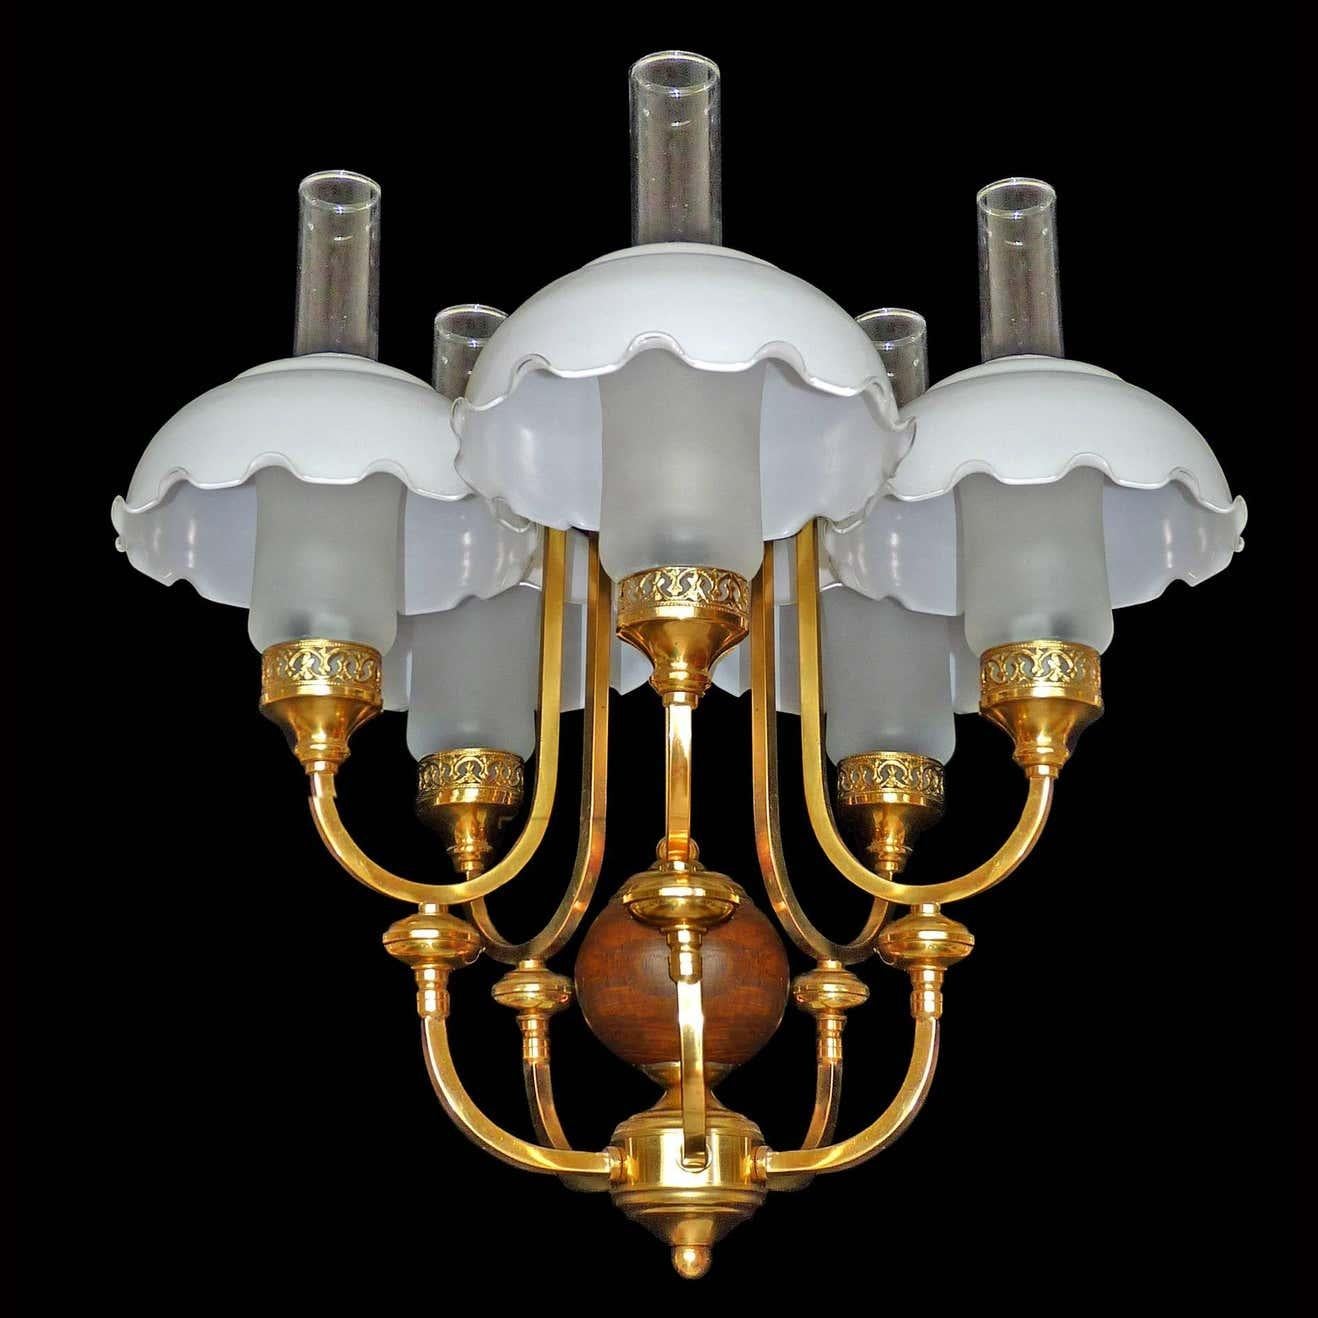 French Art Deco Library Oil Lamp Chandelier Gilt Brass and Opaline Glass Shades In Good Condition For Sale In Coimbra, PT